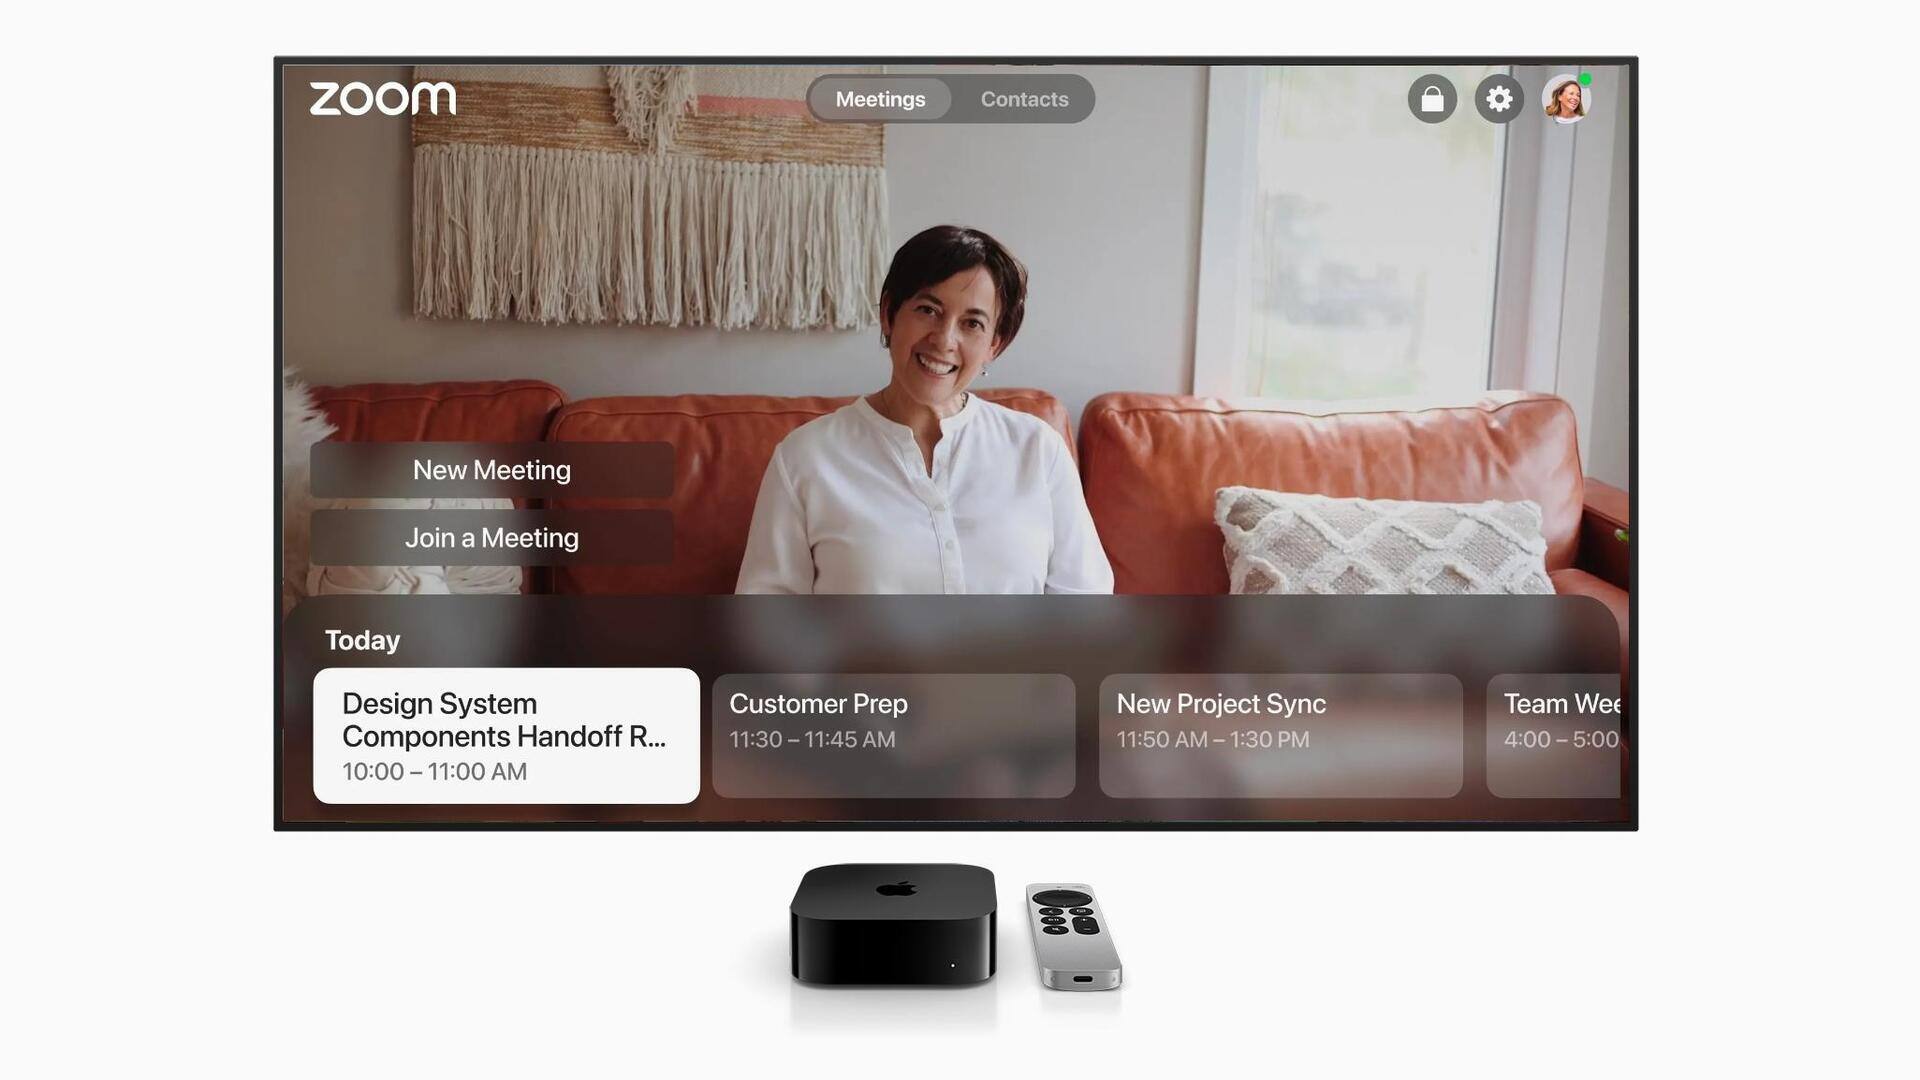 Zoom videoconferencing app now available on Apple TV 4K